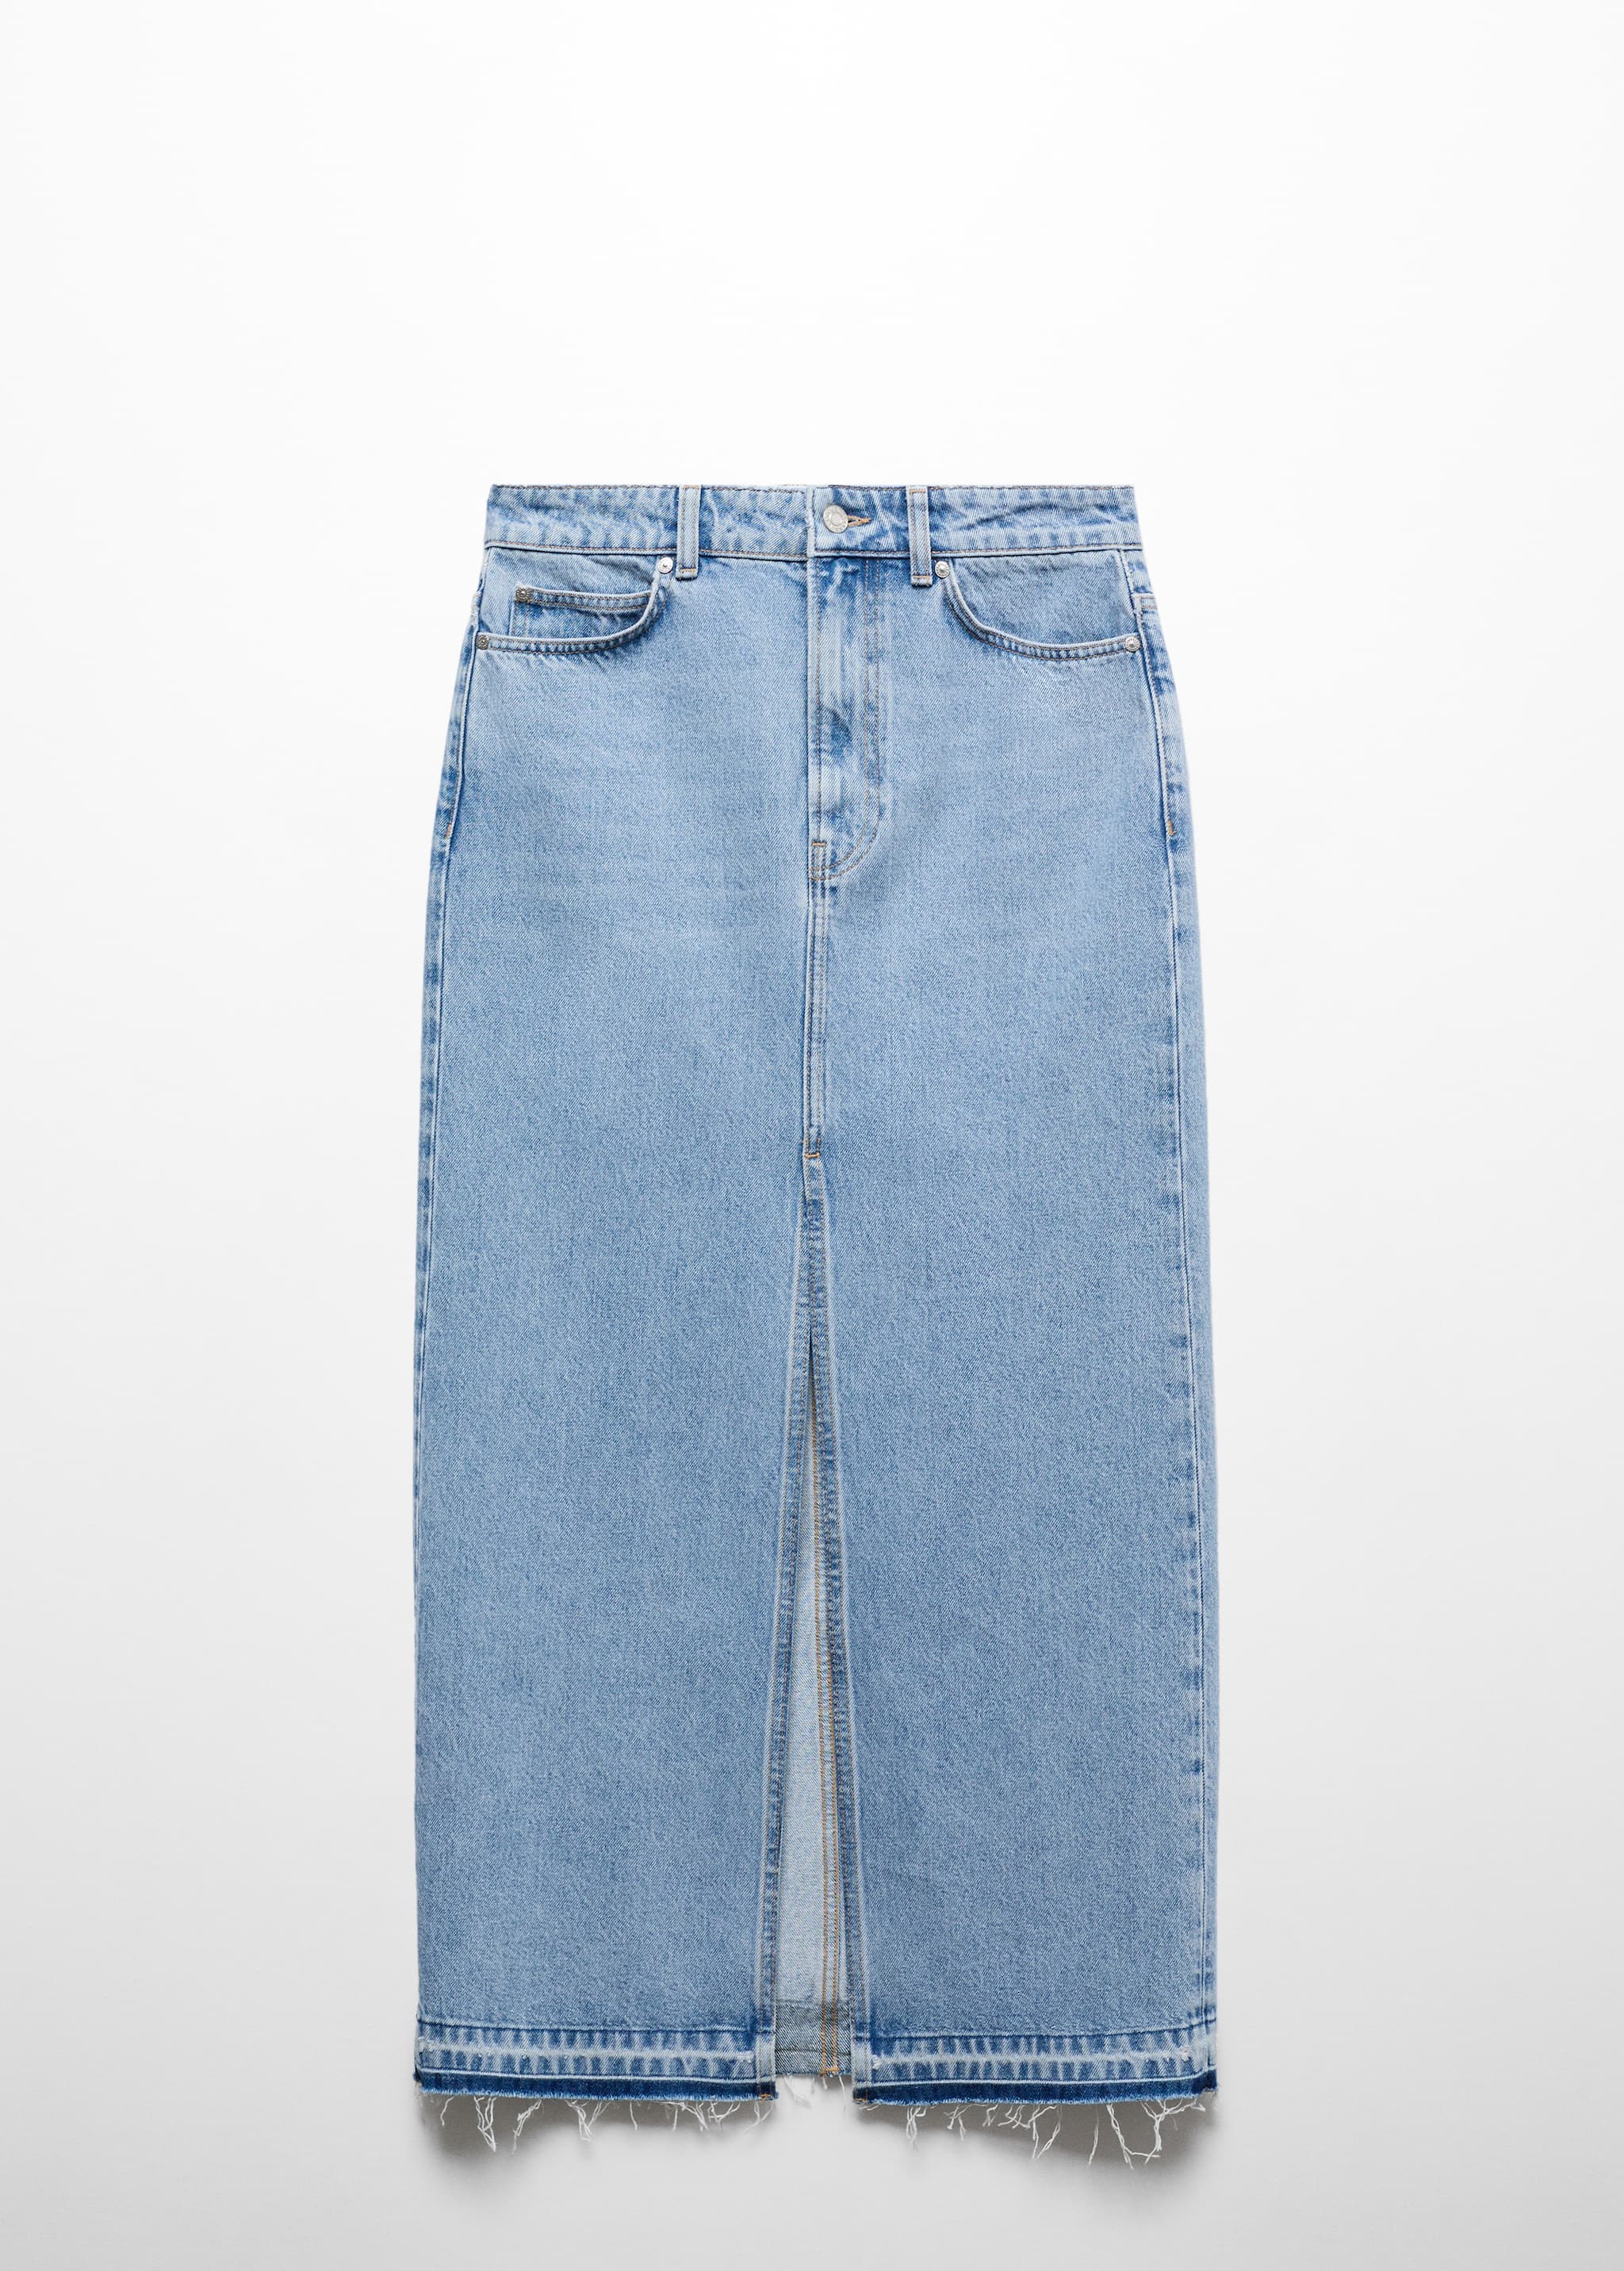 Denim skirt with frayed hem - Article without model